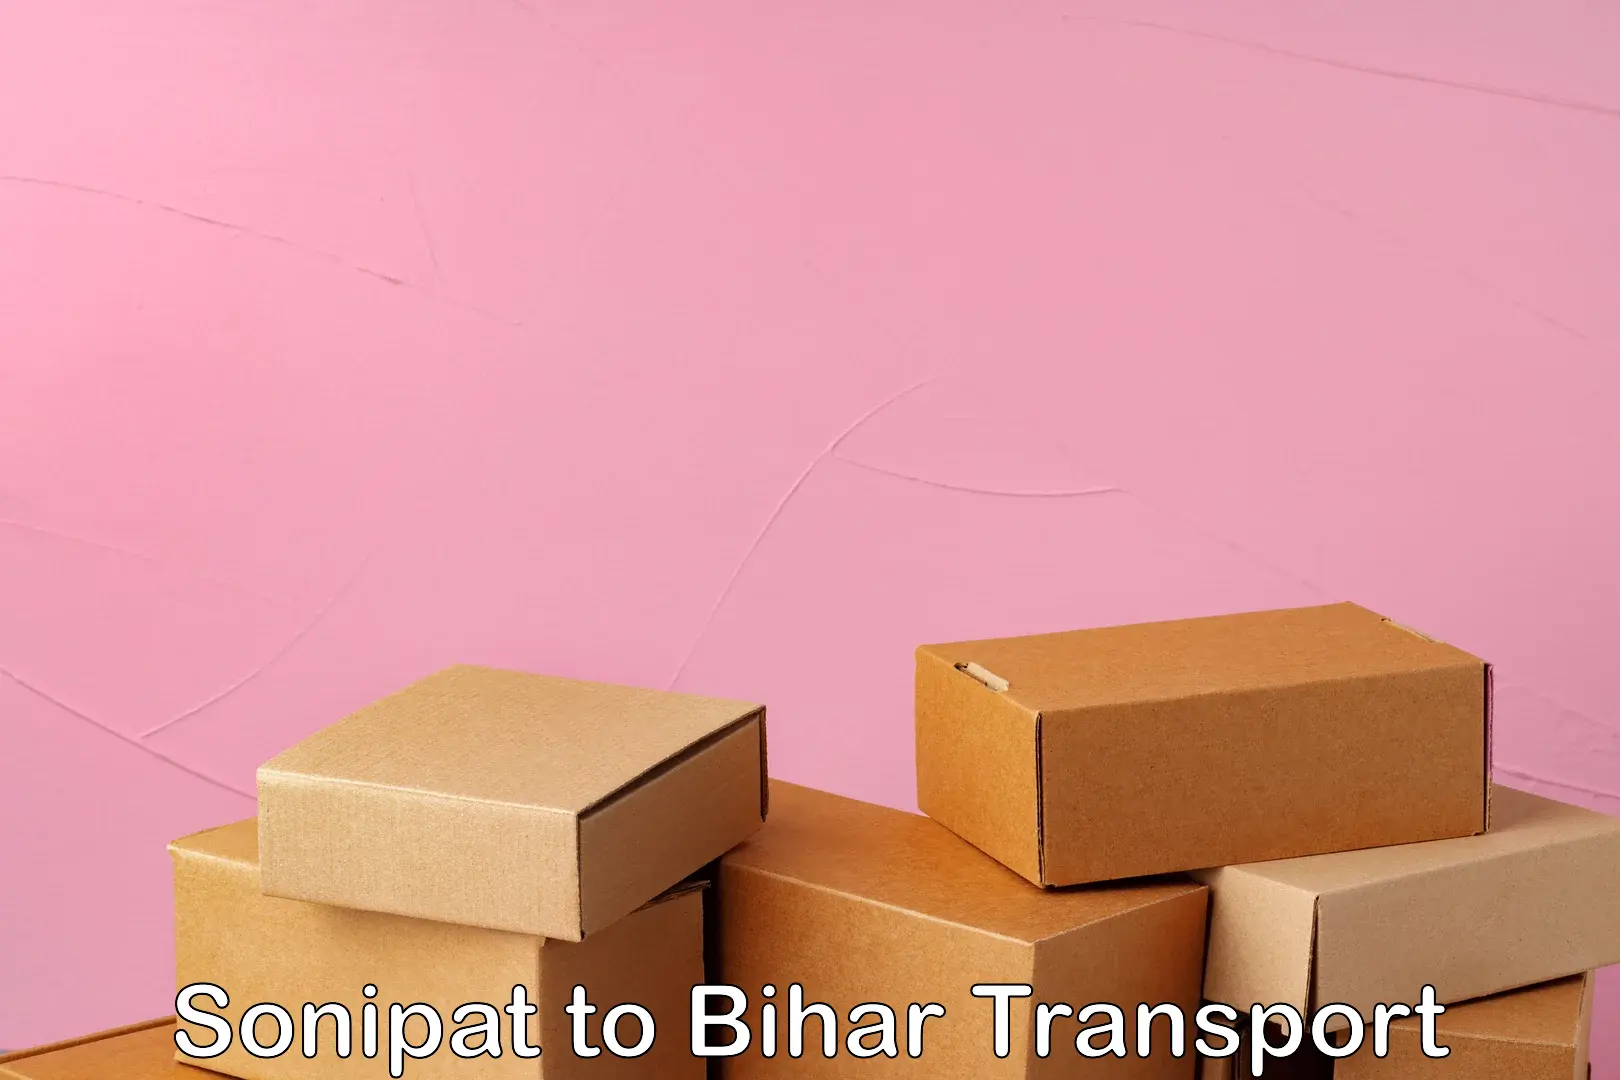 Air freight transport services Sonipat to Bihar